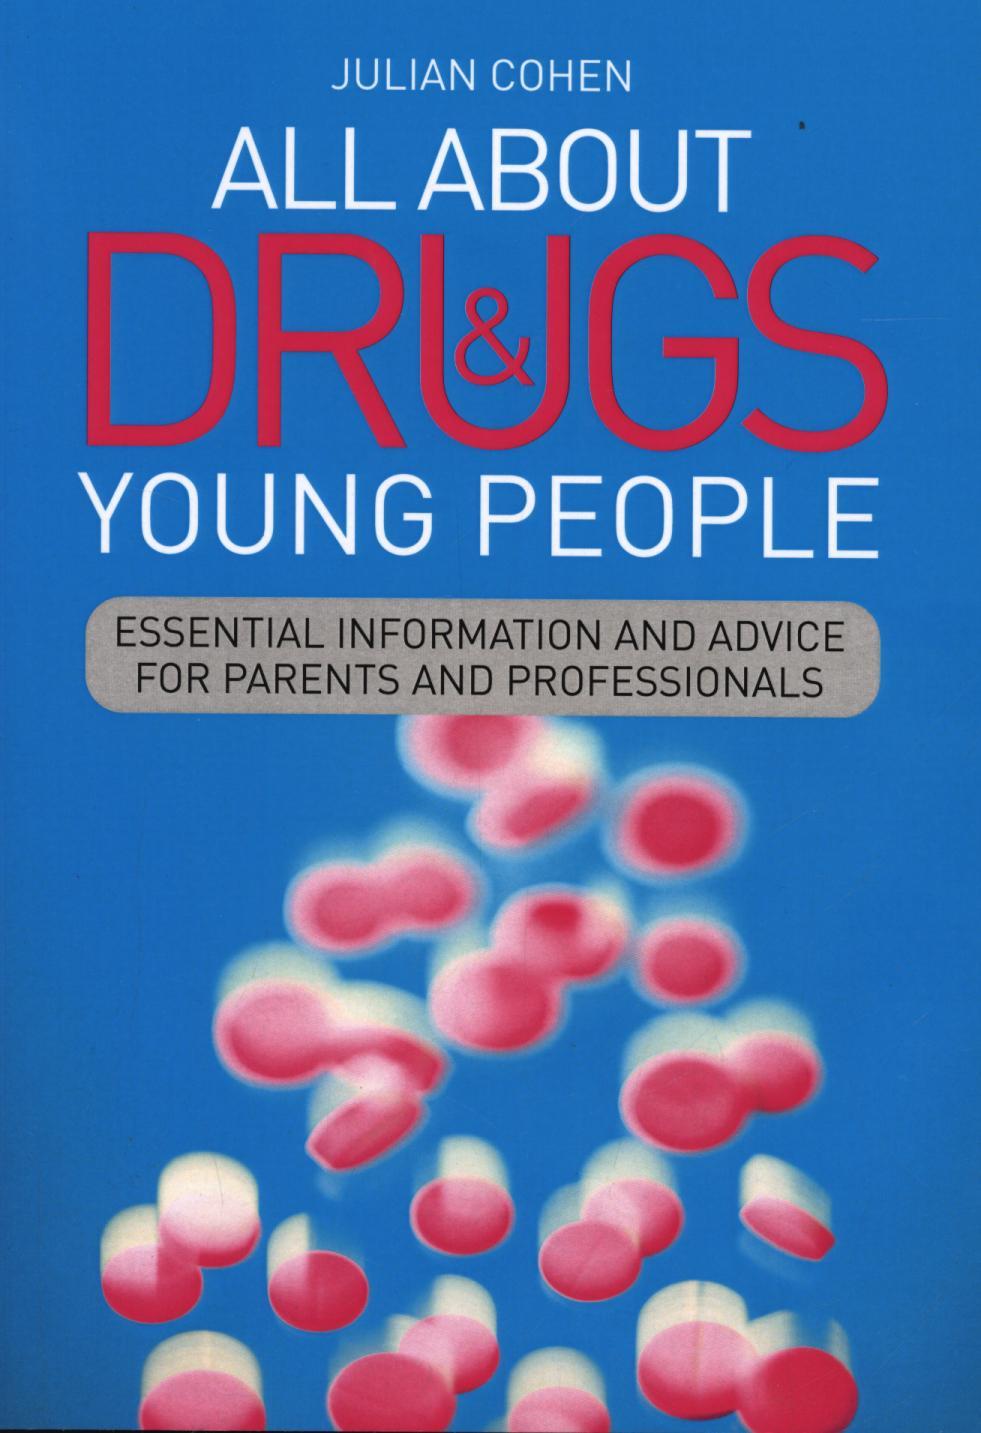 All About Drugs and Young People